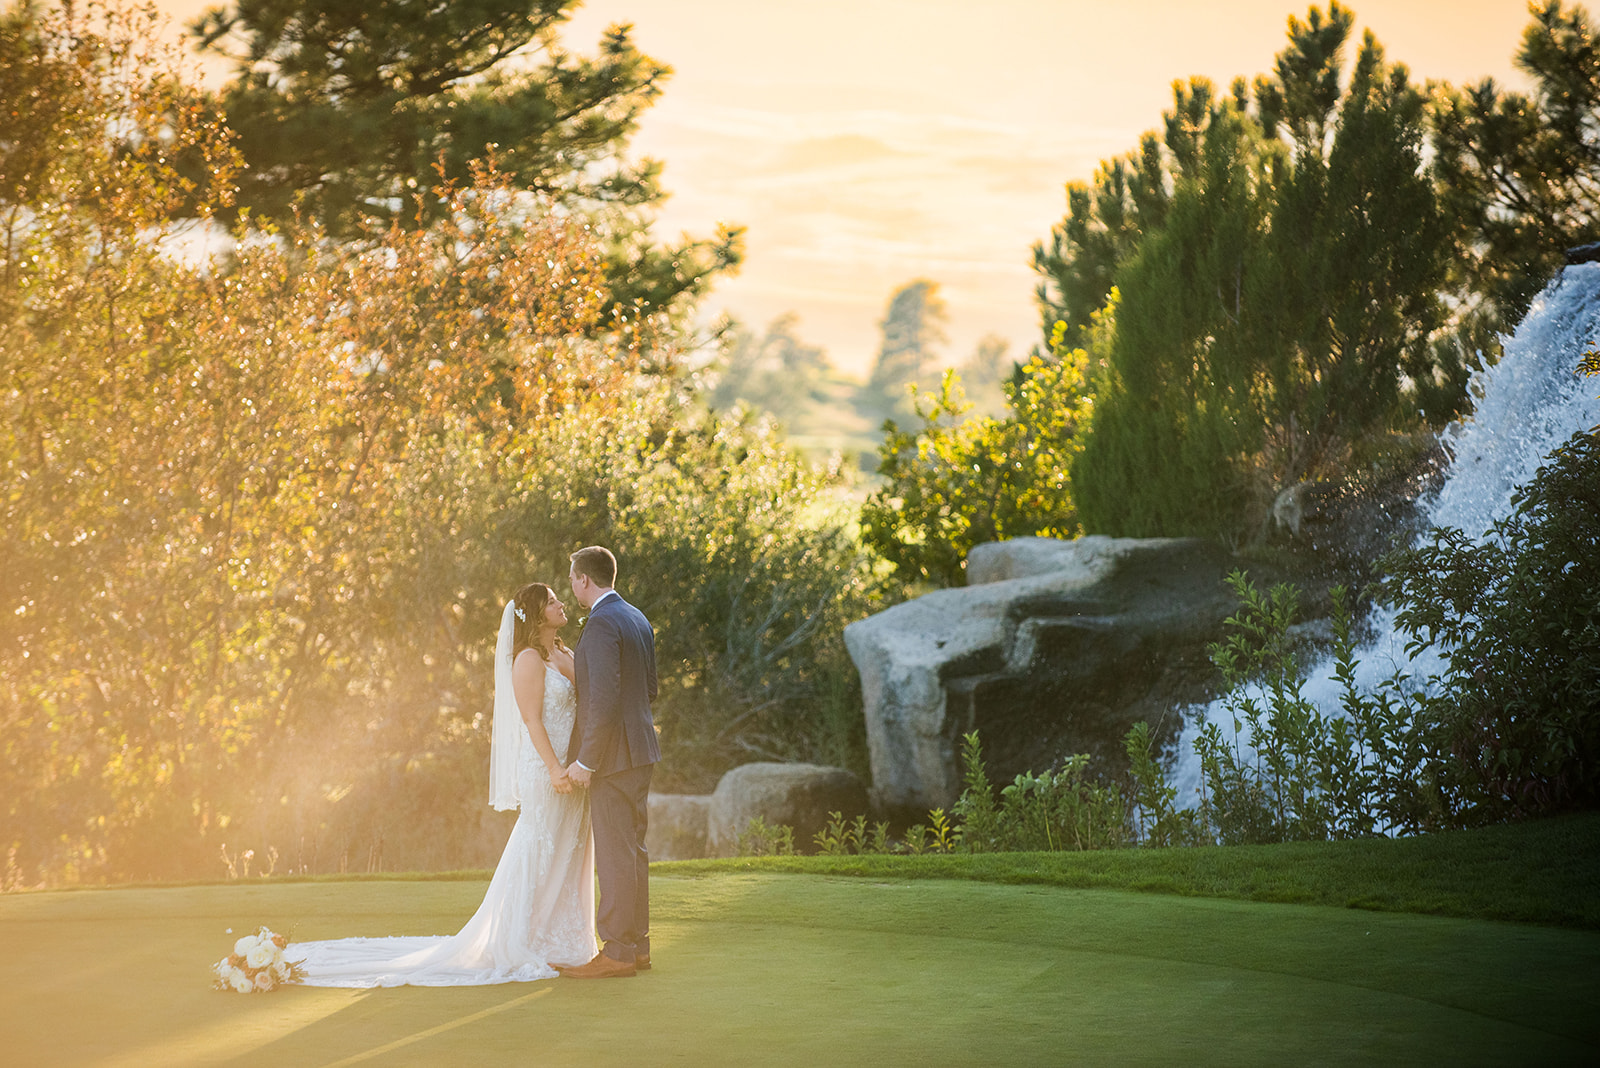 A wide angle shot of the bride and groom holding hands on the gold course at golden hour with the waterfall in the back.